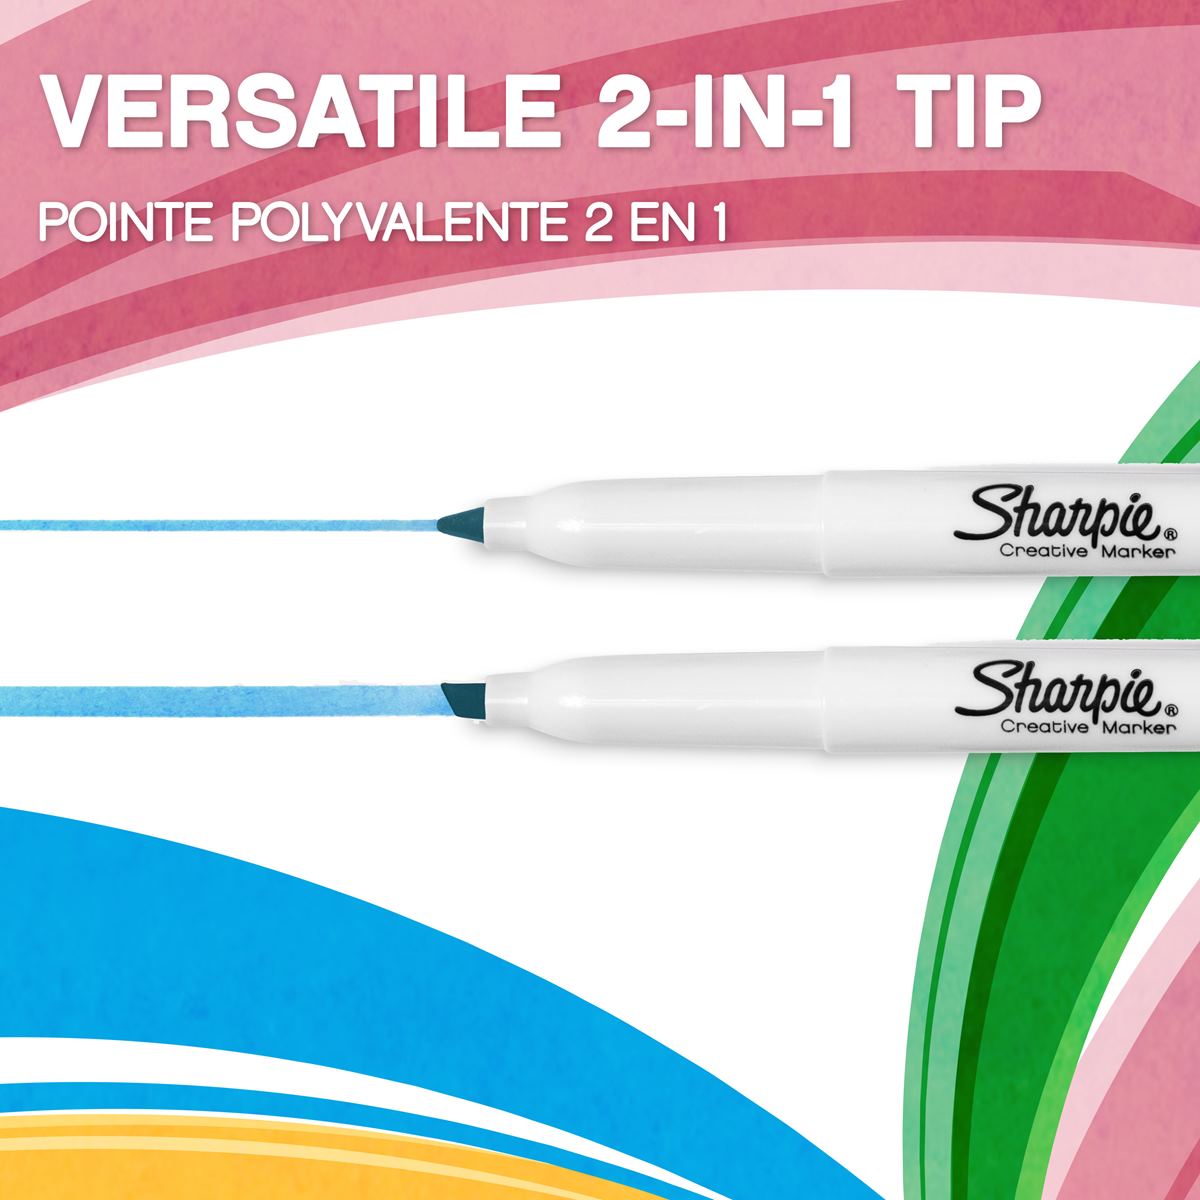 Sharpie S-Note Pastel Highlighters - Pack of 20